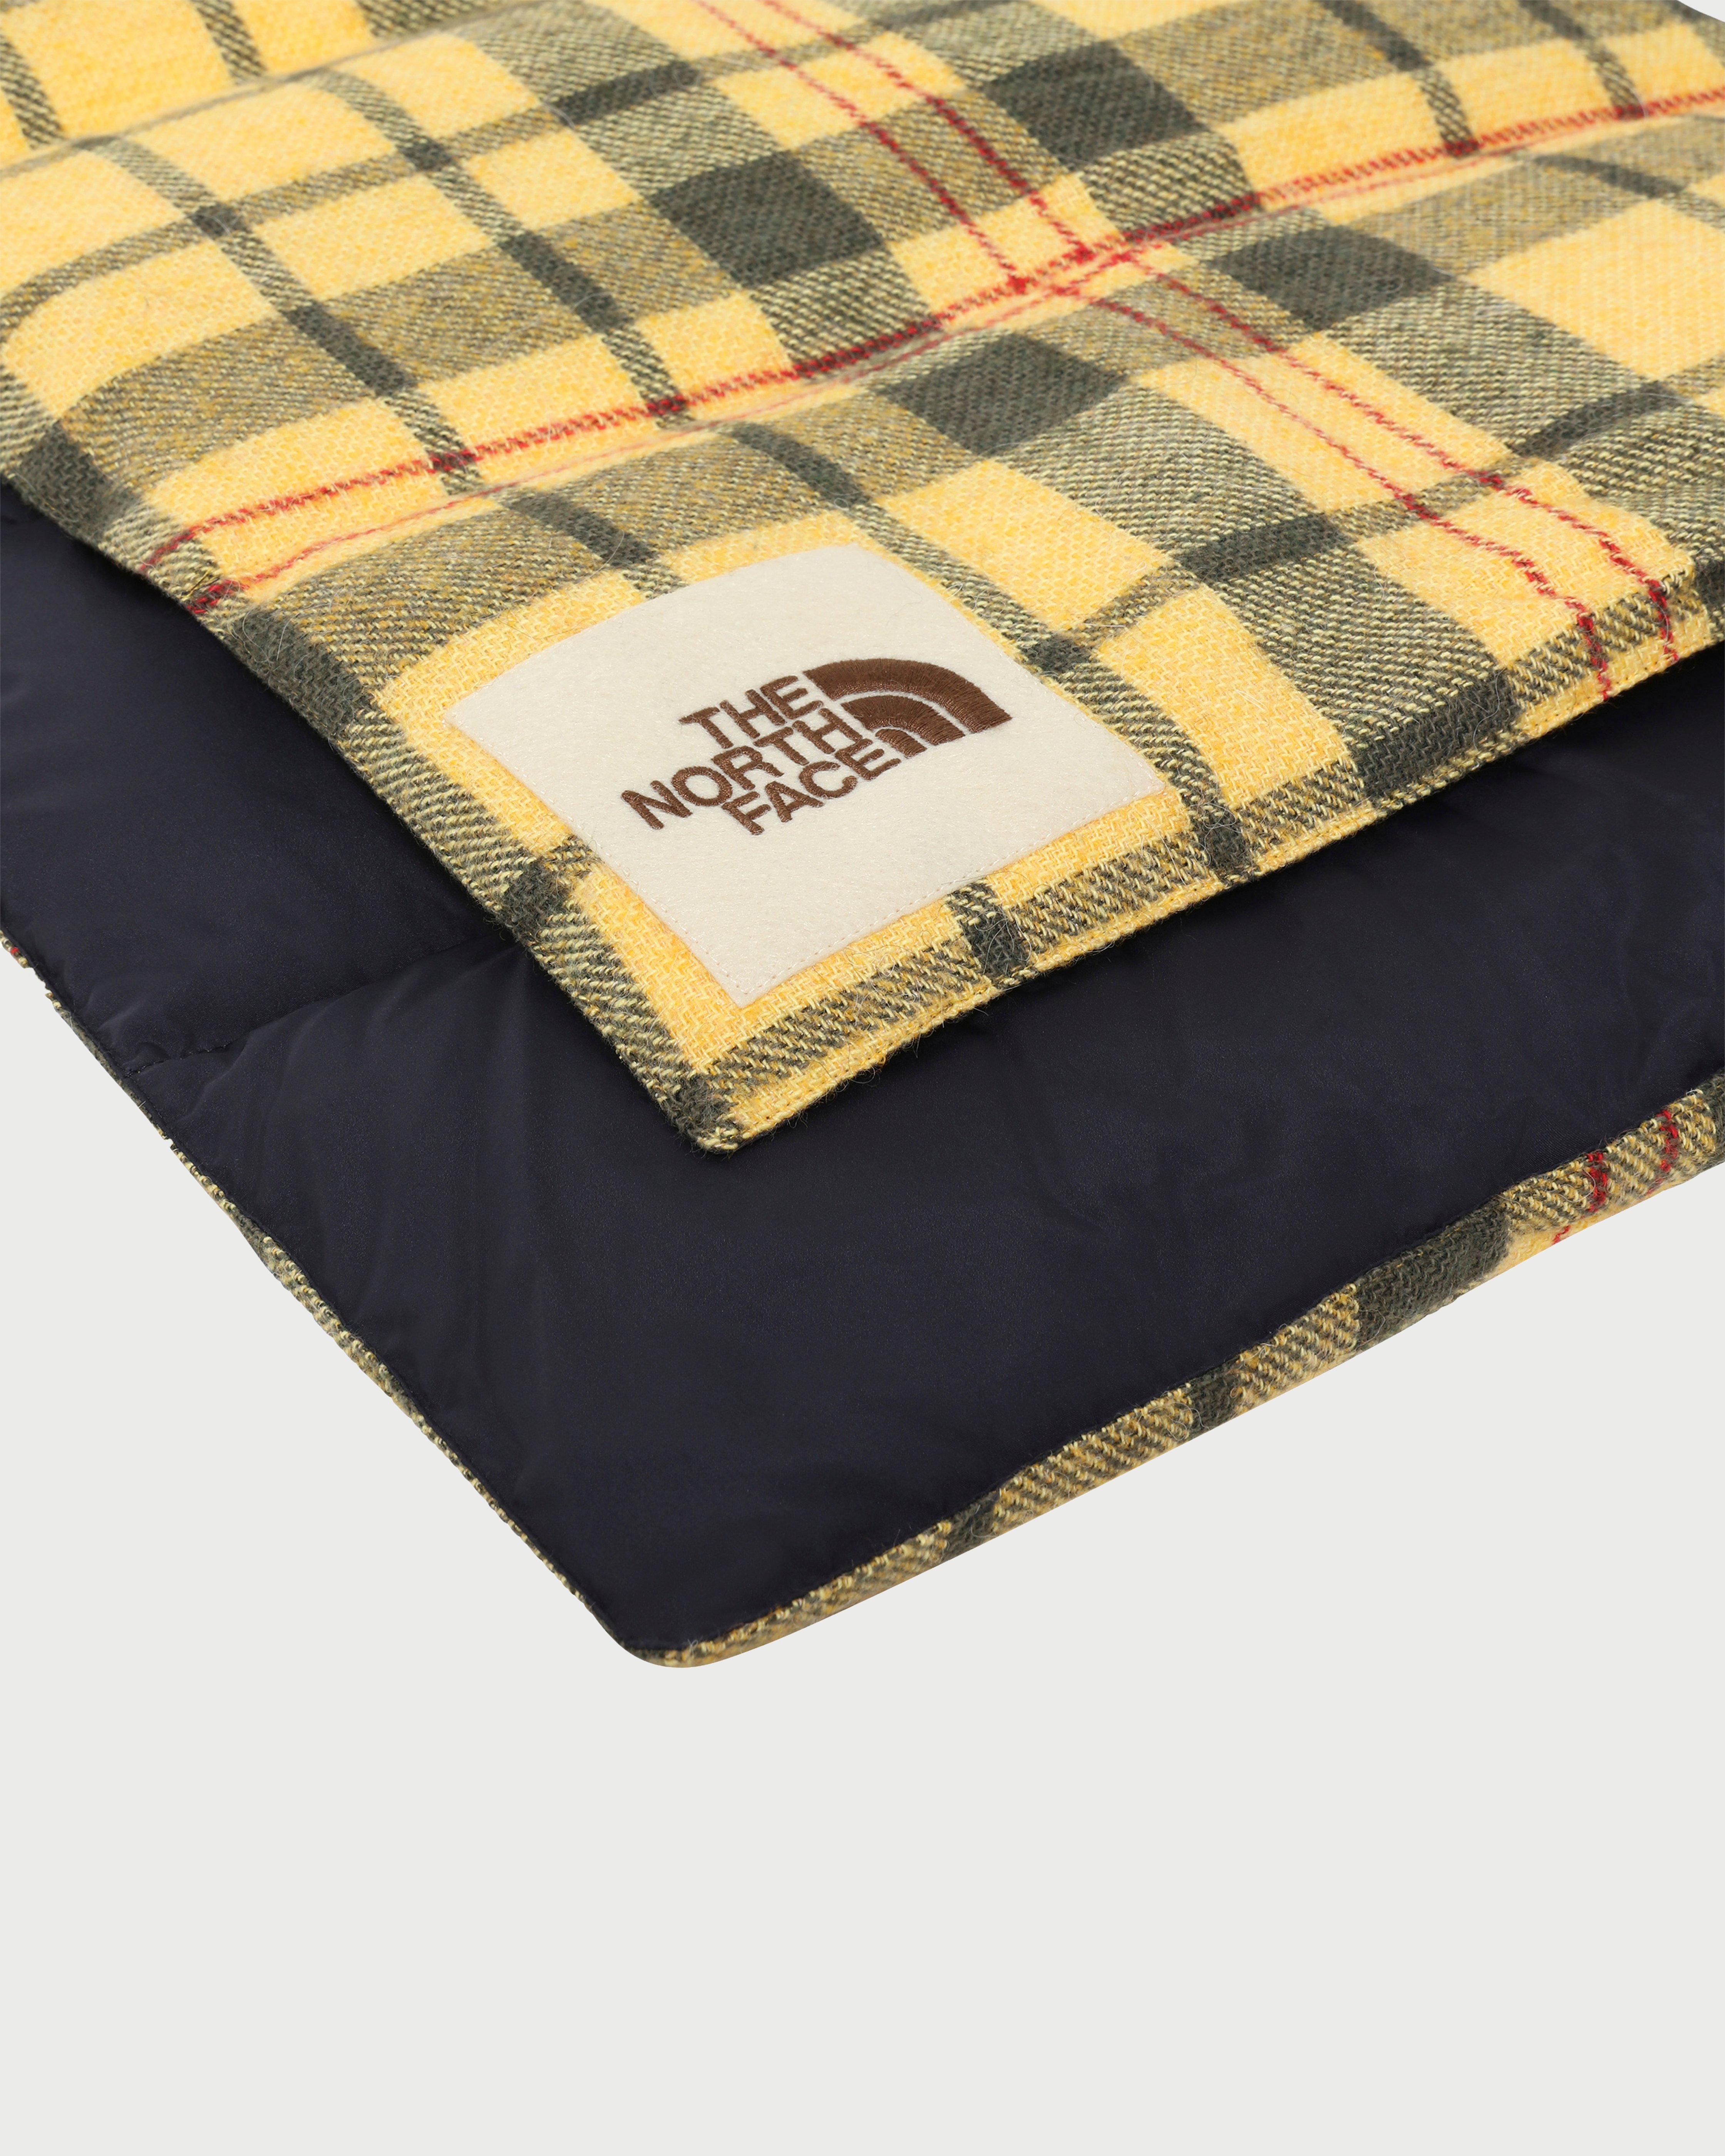 The North Face - Brown Label Insulated Scarf Summer Gold Heritage Unisex - Accessories - Yellow - Image 2